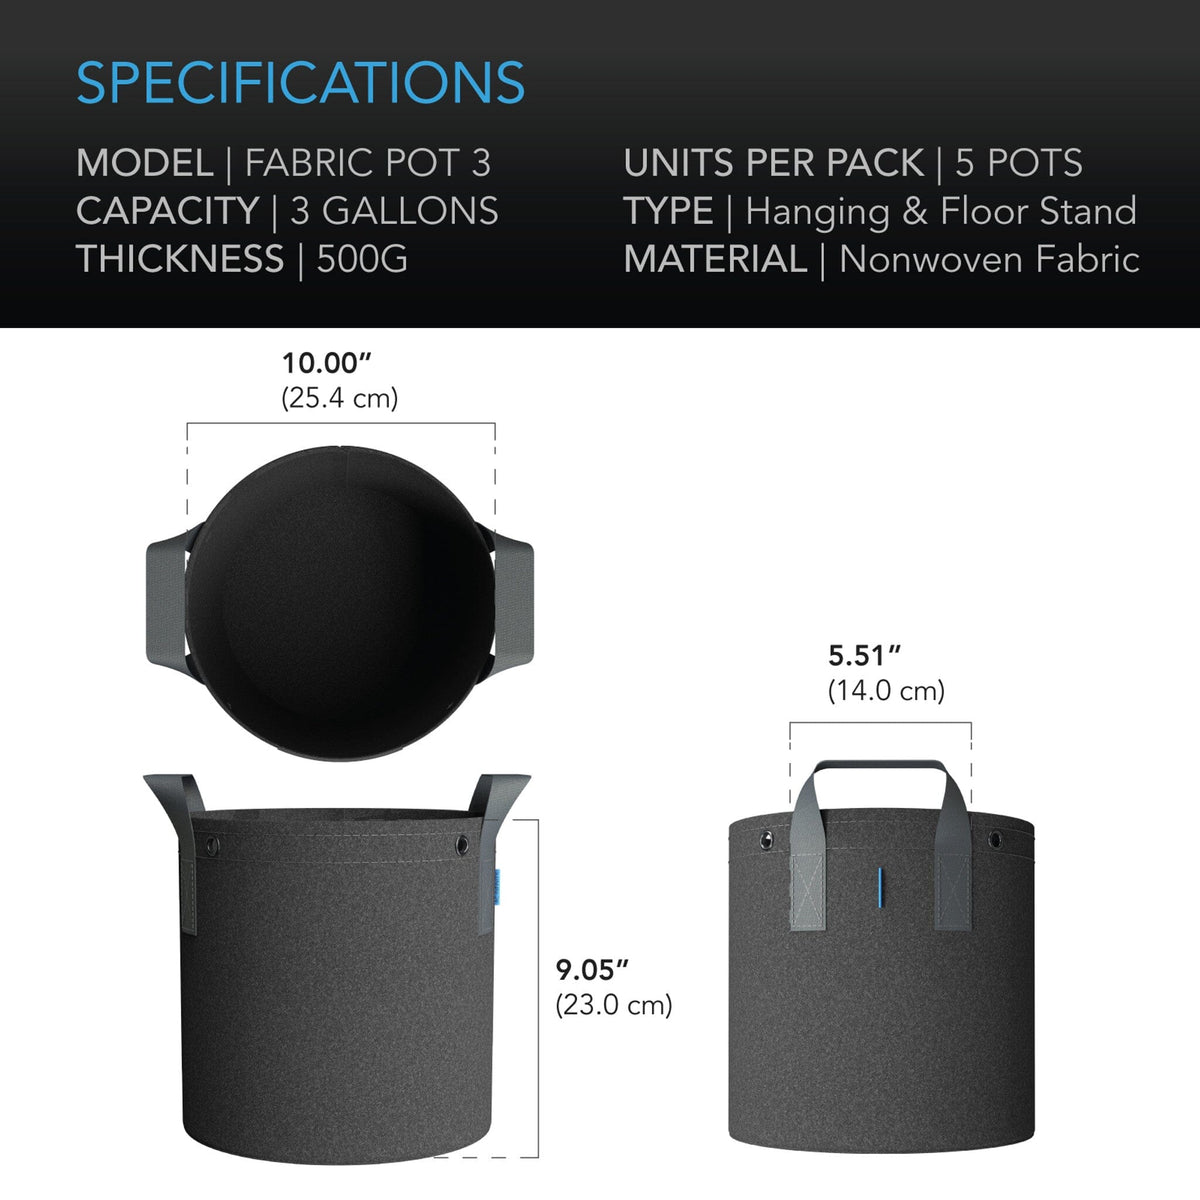 3 gallon fabric pot specifications